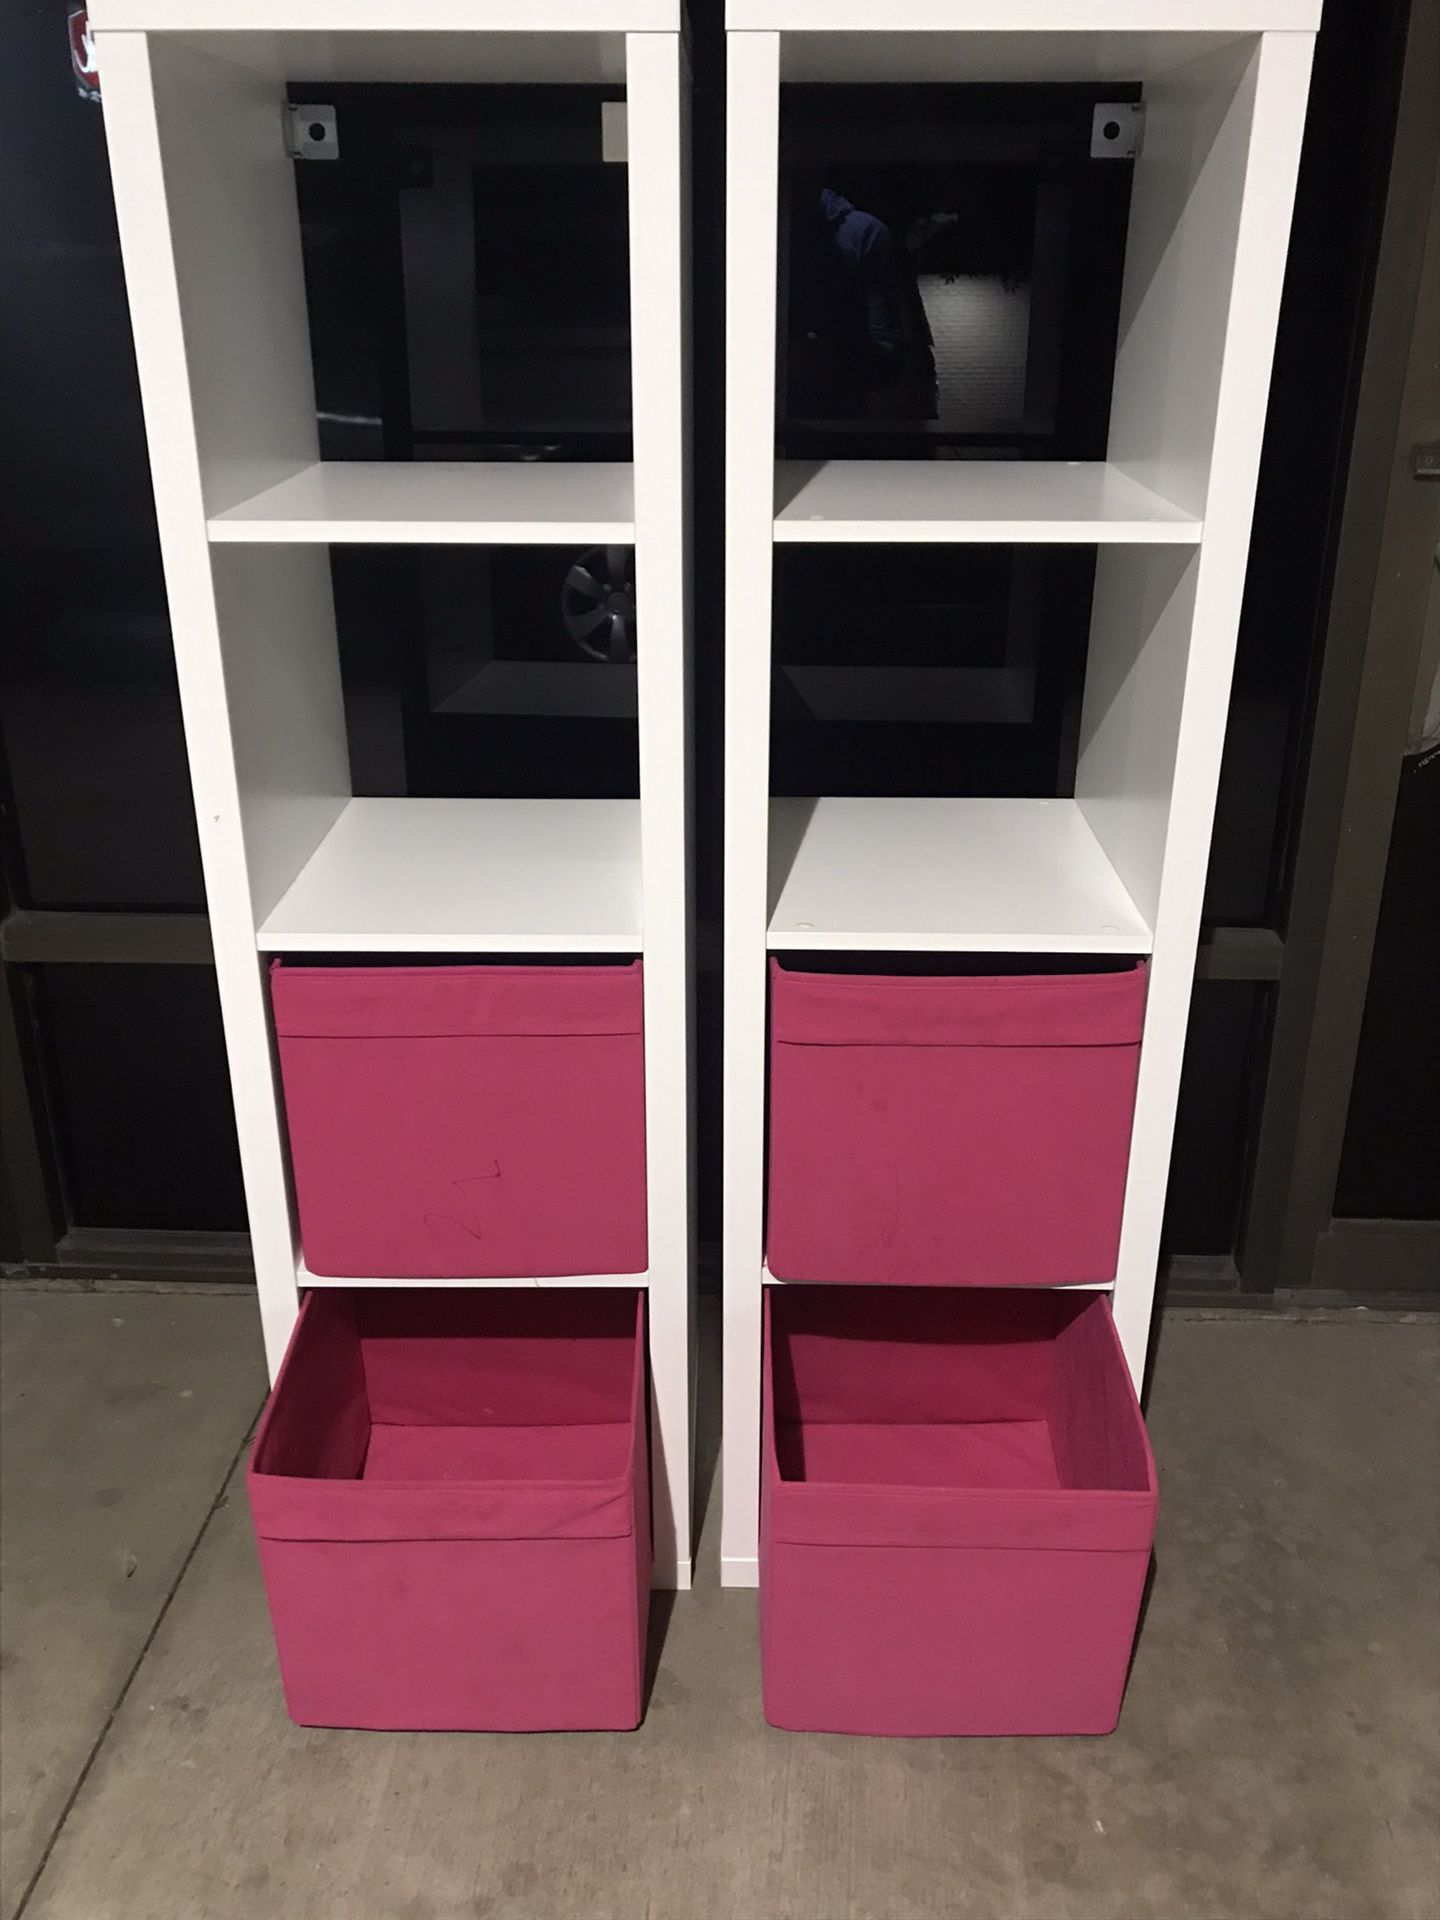 IKEA KELLAX 4 x 1 CUBE BOOKCASE WITH 2 PINK INSERT BOXES $50. ONLY ONE AVAILABLE